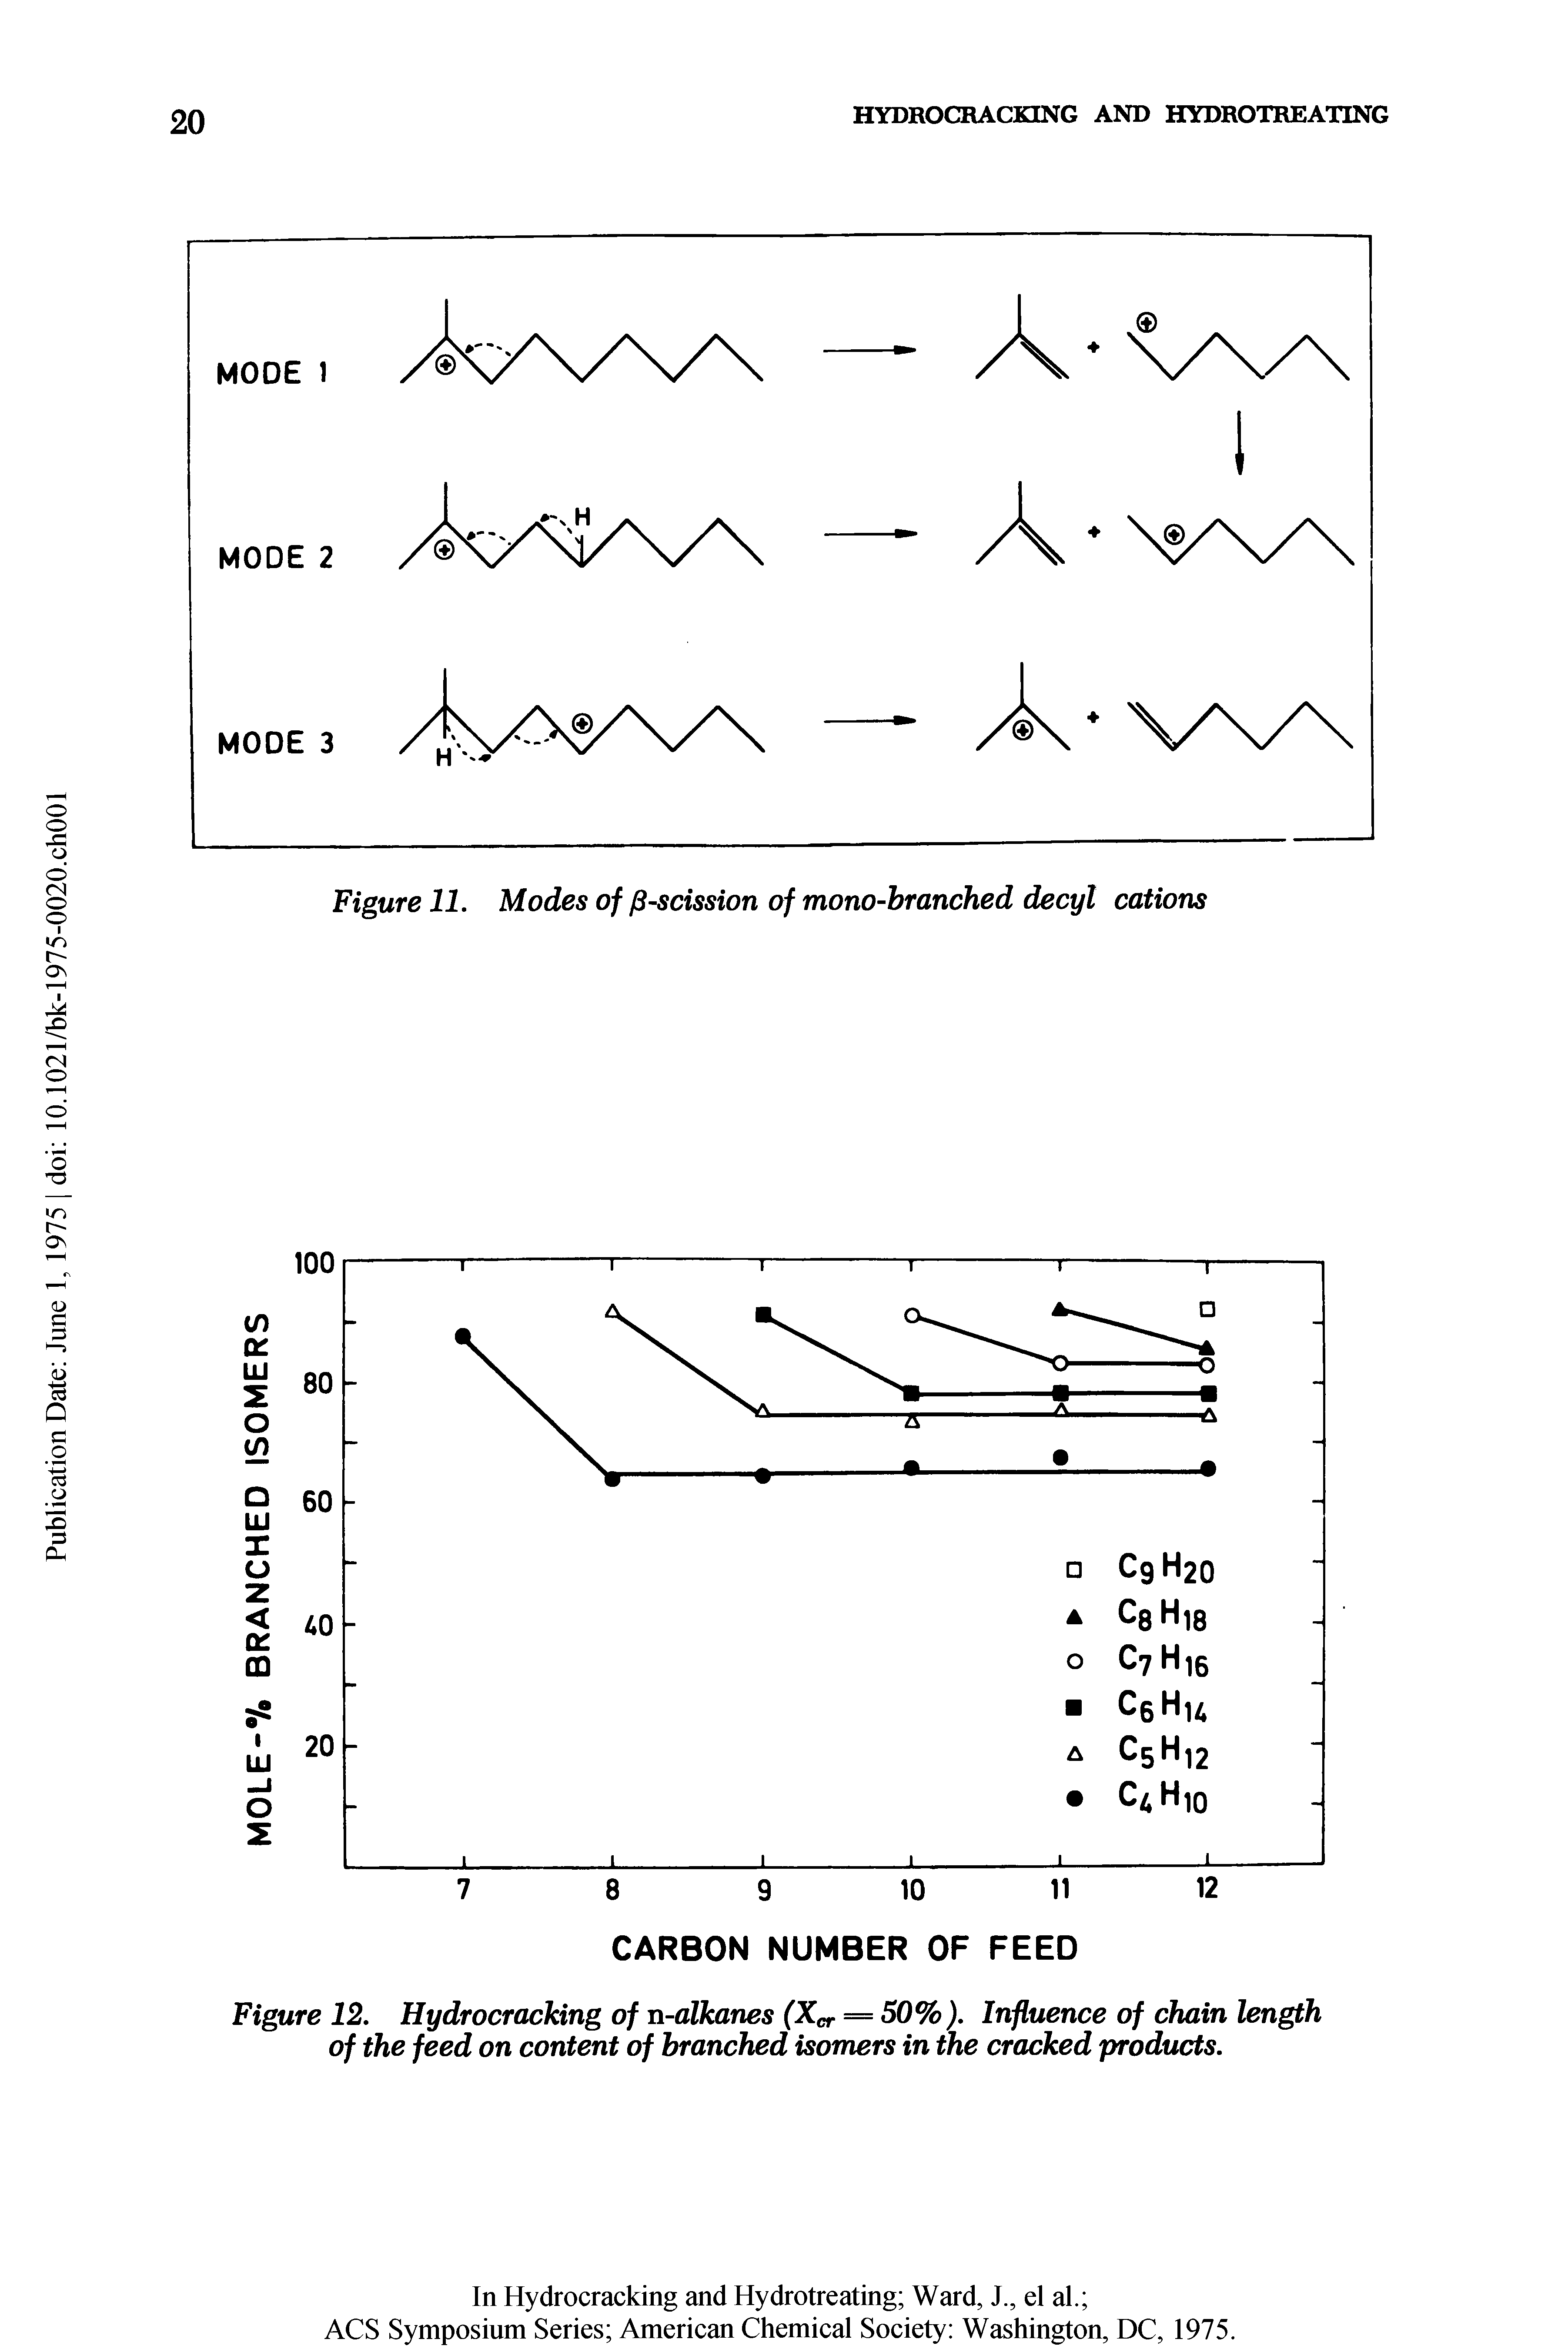 Figure 12. Hydrocracking of n-alkanes (Xr = 50%). Influence of chain length of the feed on content of branched isomers in the cracked products.